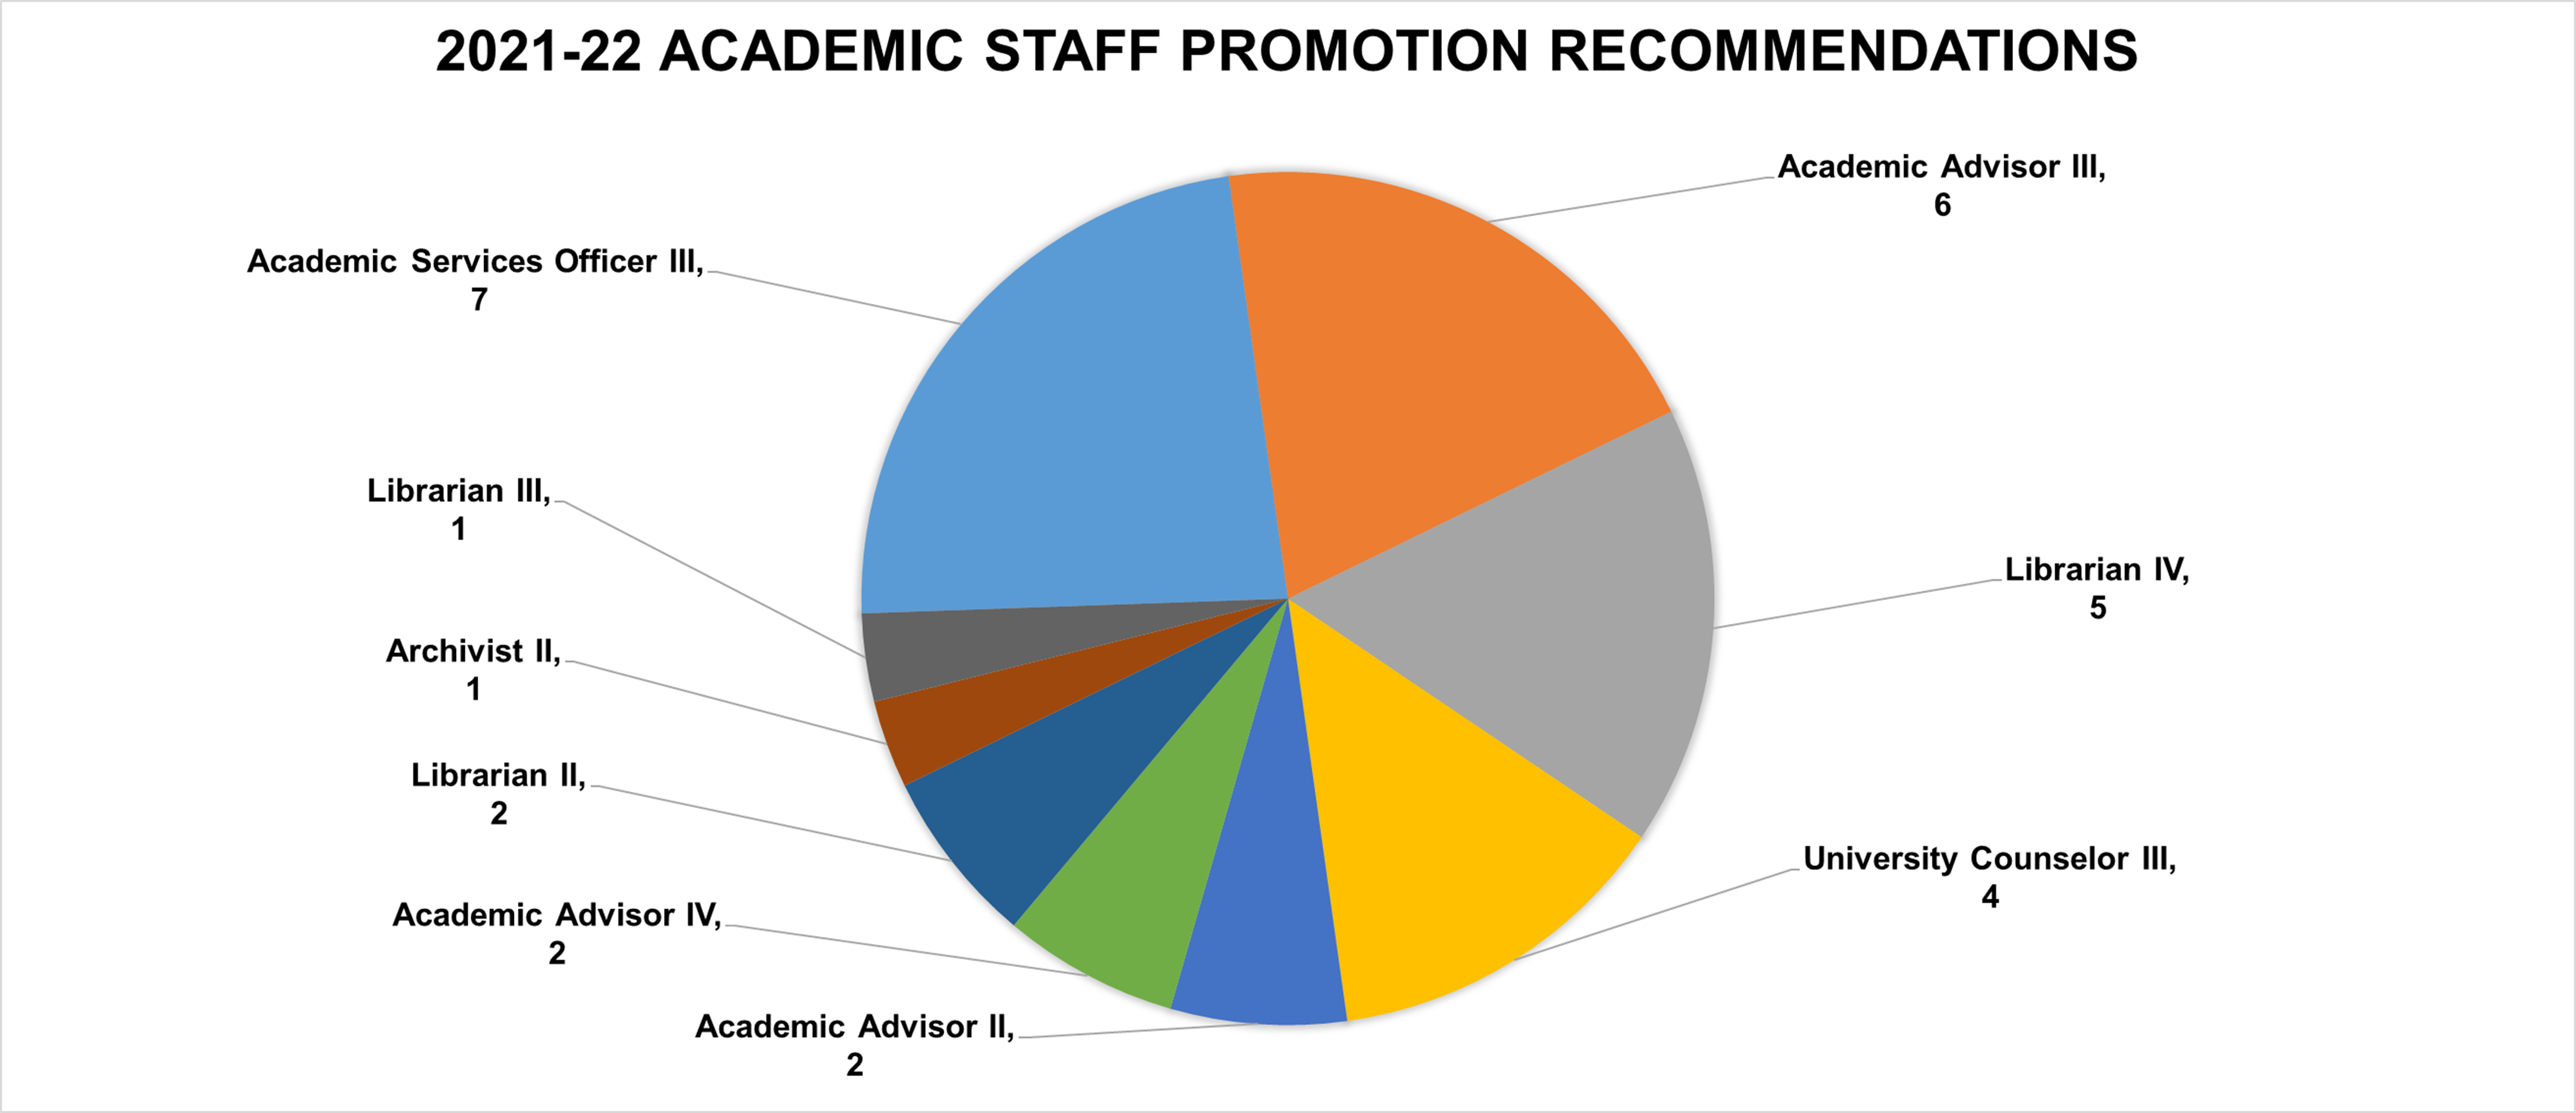 2021-22 Academic Staff Promotion Recommendations